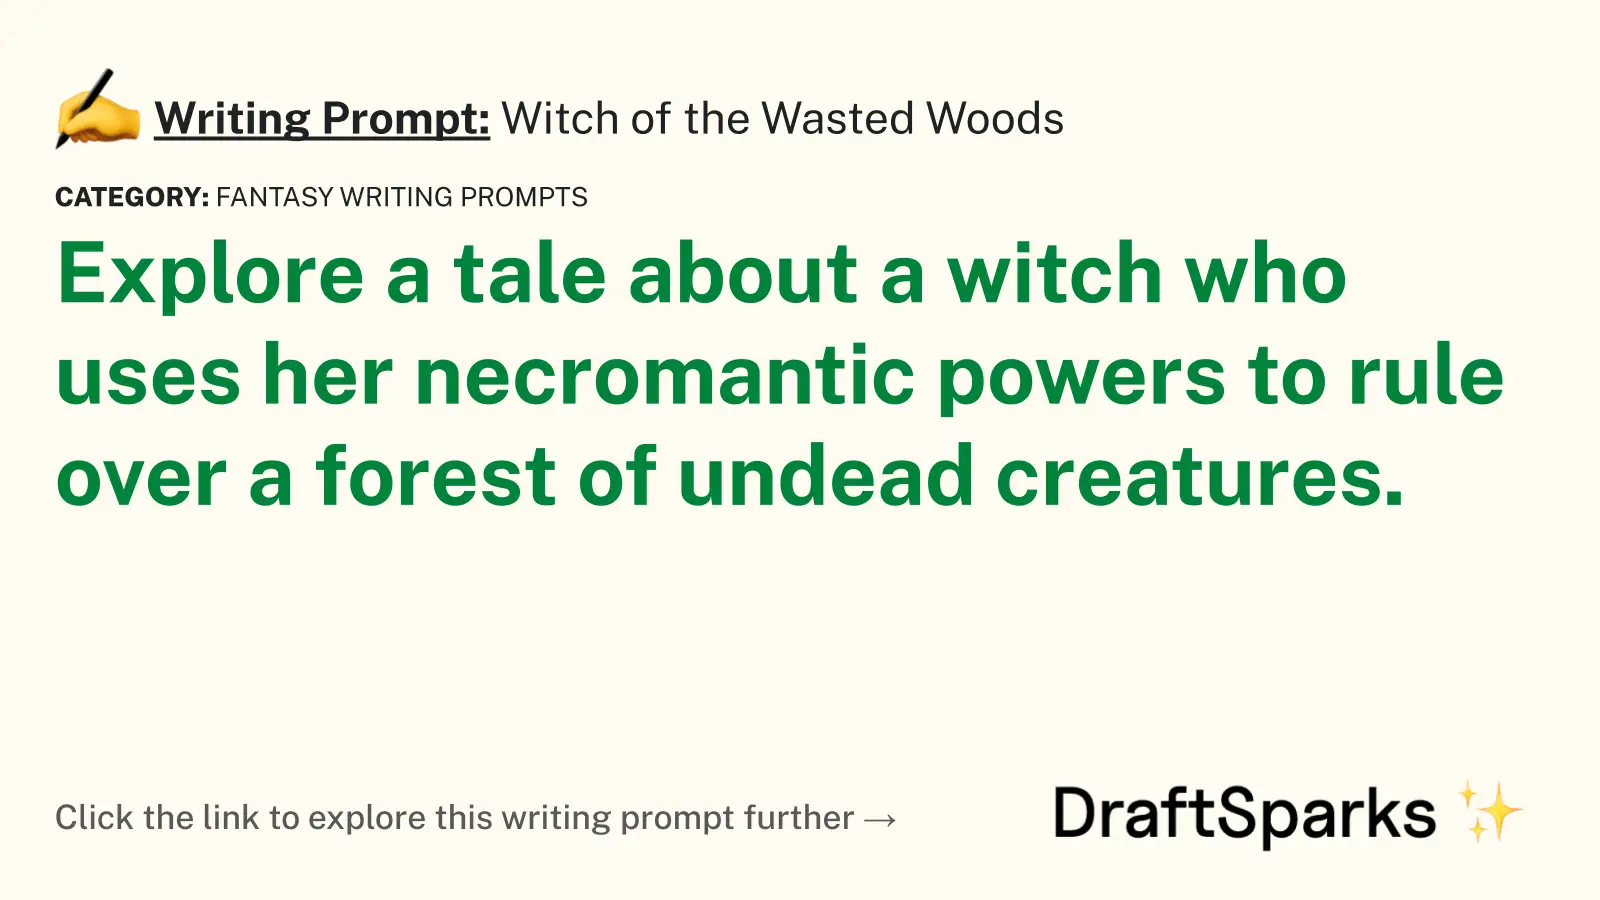 Witch of the Wasted Woods